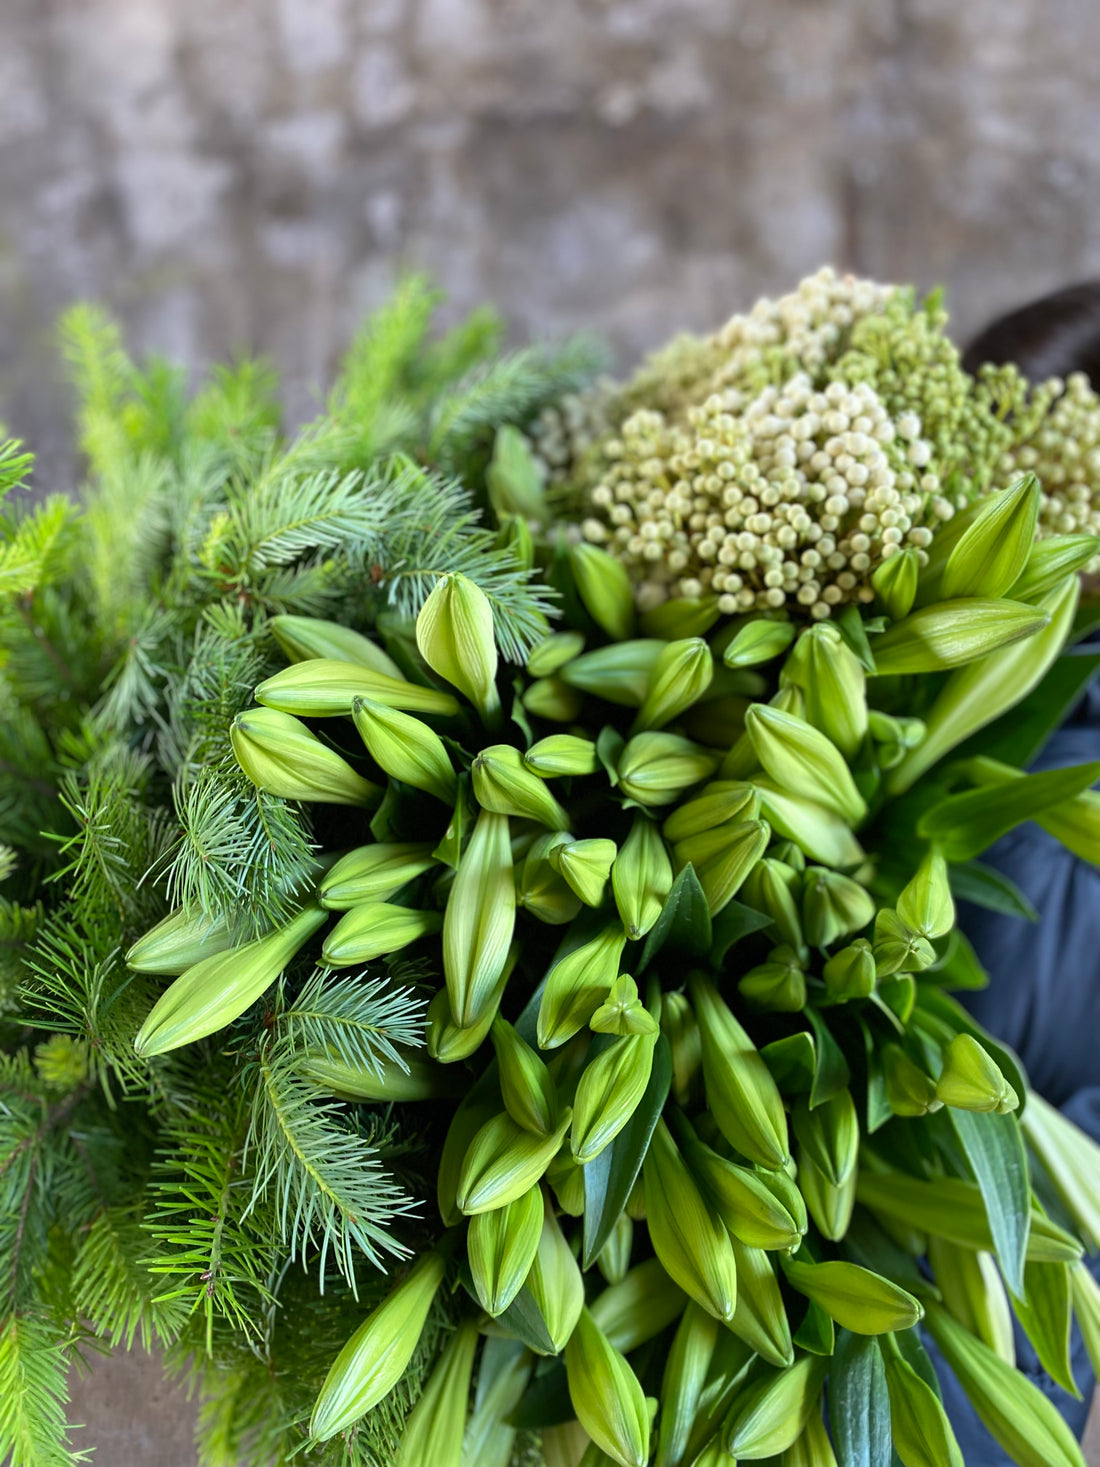 A large bundle of Christmas flowers and foliage being held by a florist, against a concrete wall.